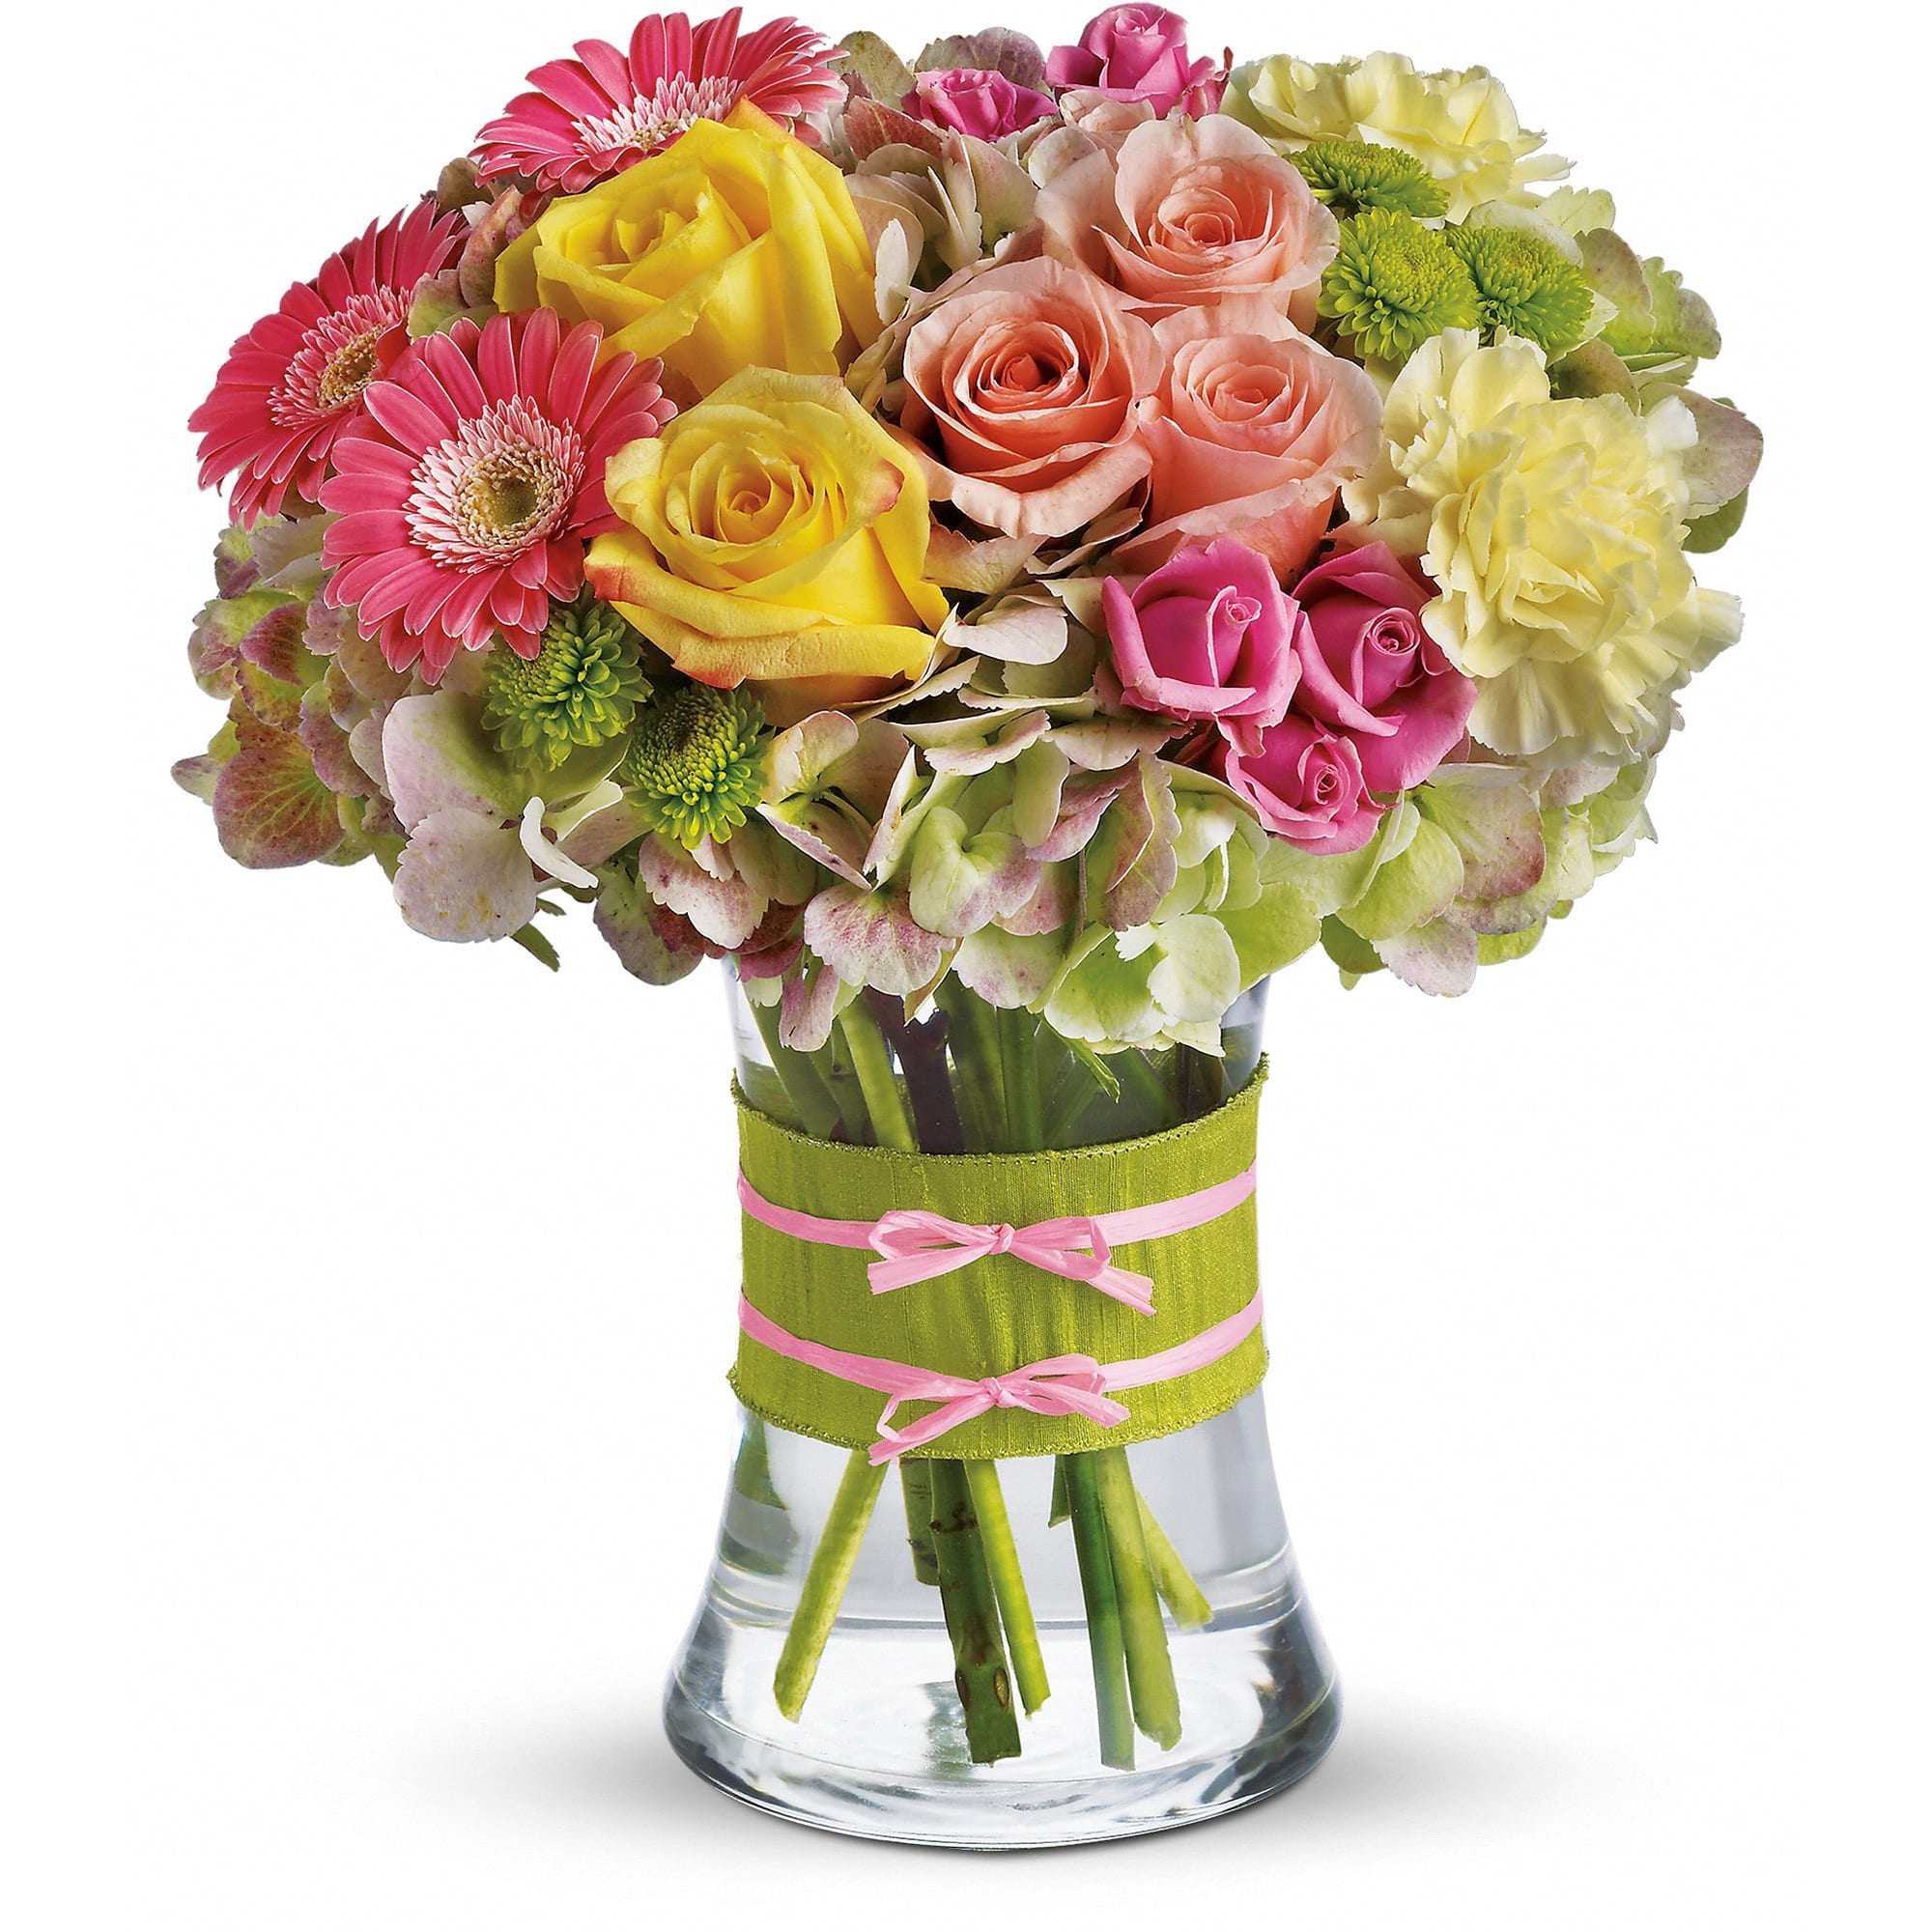 Fashionista Blooms - This arrangement would be perfect for any girl with an eye for style. It's a must-have for fashionistas everywhere.  Gorgeous green hydrangea, yellow and light pink roses, pink spray roses and mini gerberas, light yellow carnations and green button spray chrysanthemums are delivered in a pretty gathering vase. Not just any vase, of course, this one's accessorized with a chartreuse taffeta ribbon and pink raffia.  Approximately 10&quot; W x 11&quot; H  Orientation: All-Around      As Shown : T155-1A     Deluxe : T155-1B     Premium : T155-1C  